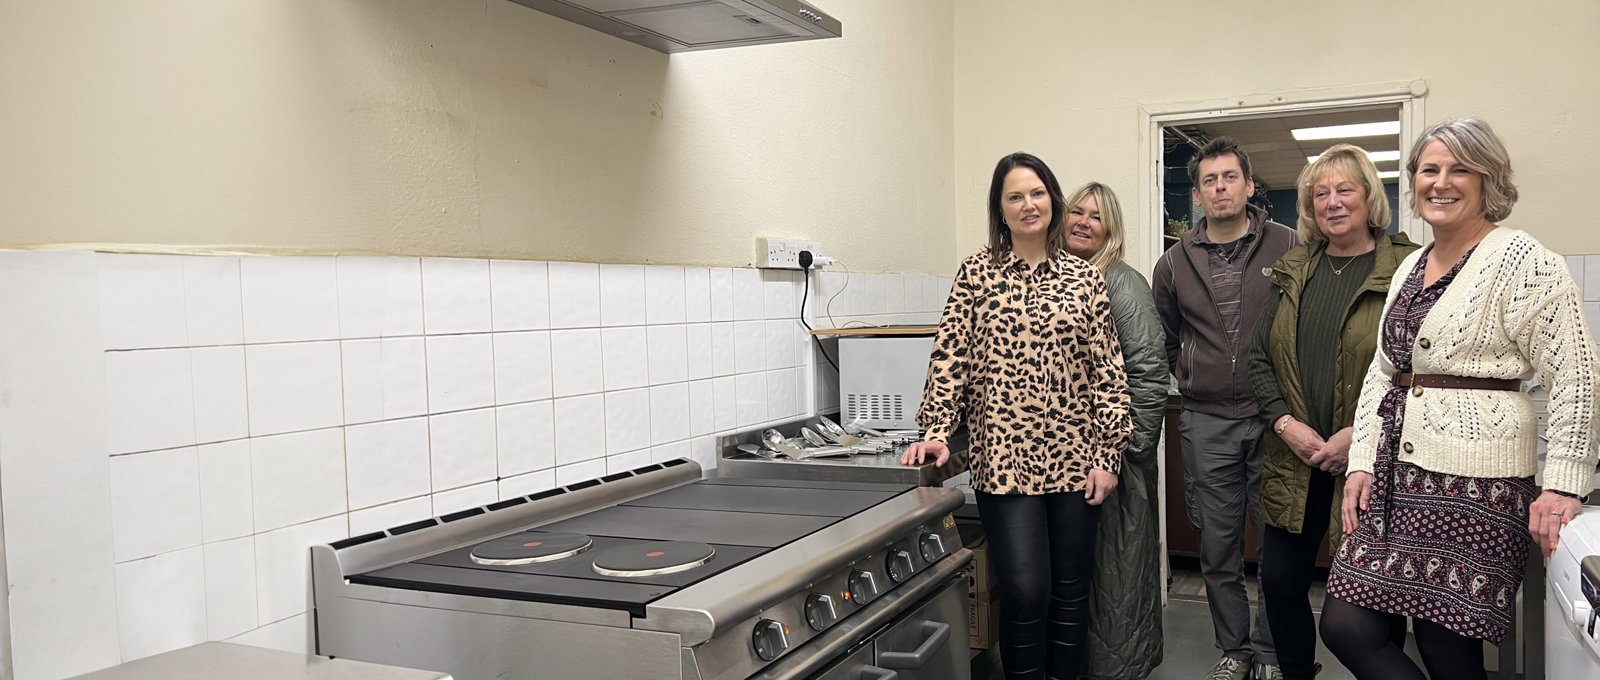 Photo of a group of people from Futures and the charity Salcare in the kitchen at Salcare alongside the newly installed cooker